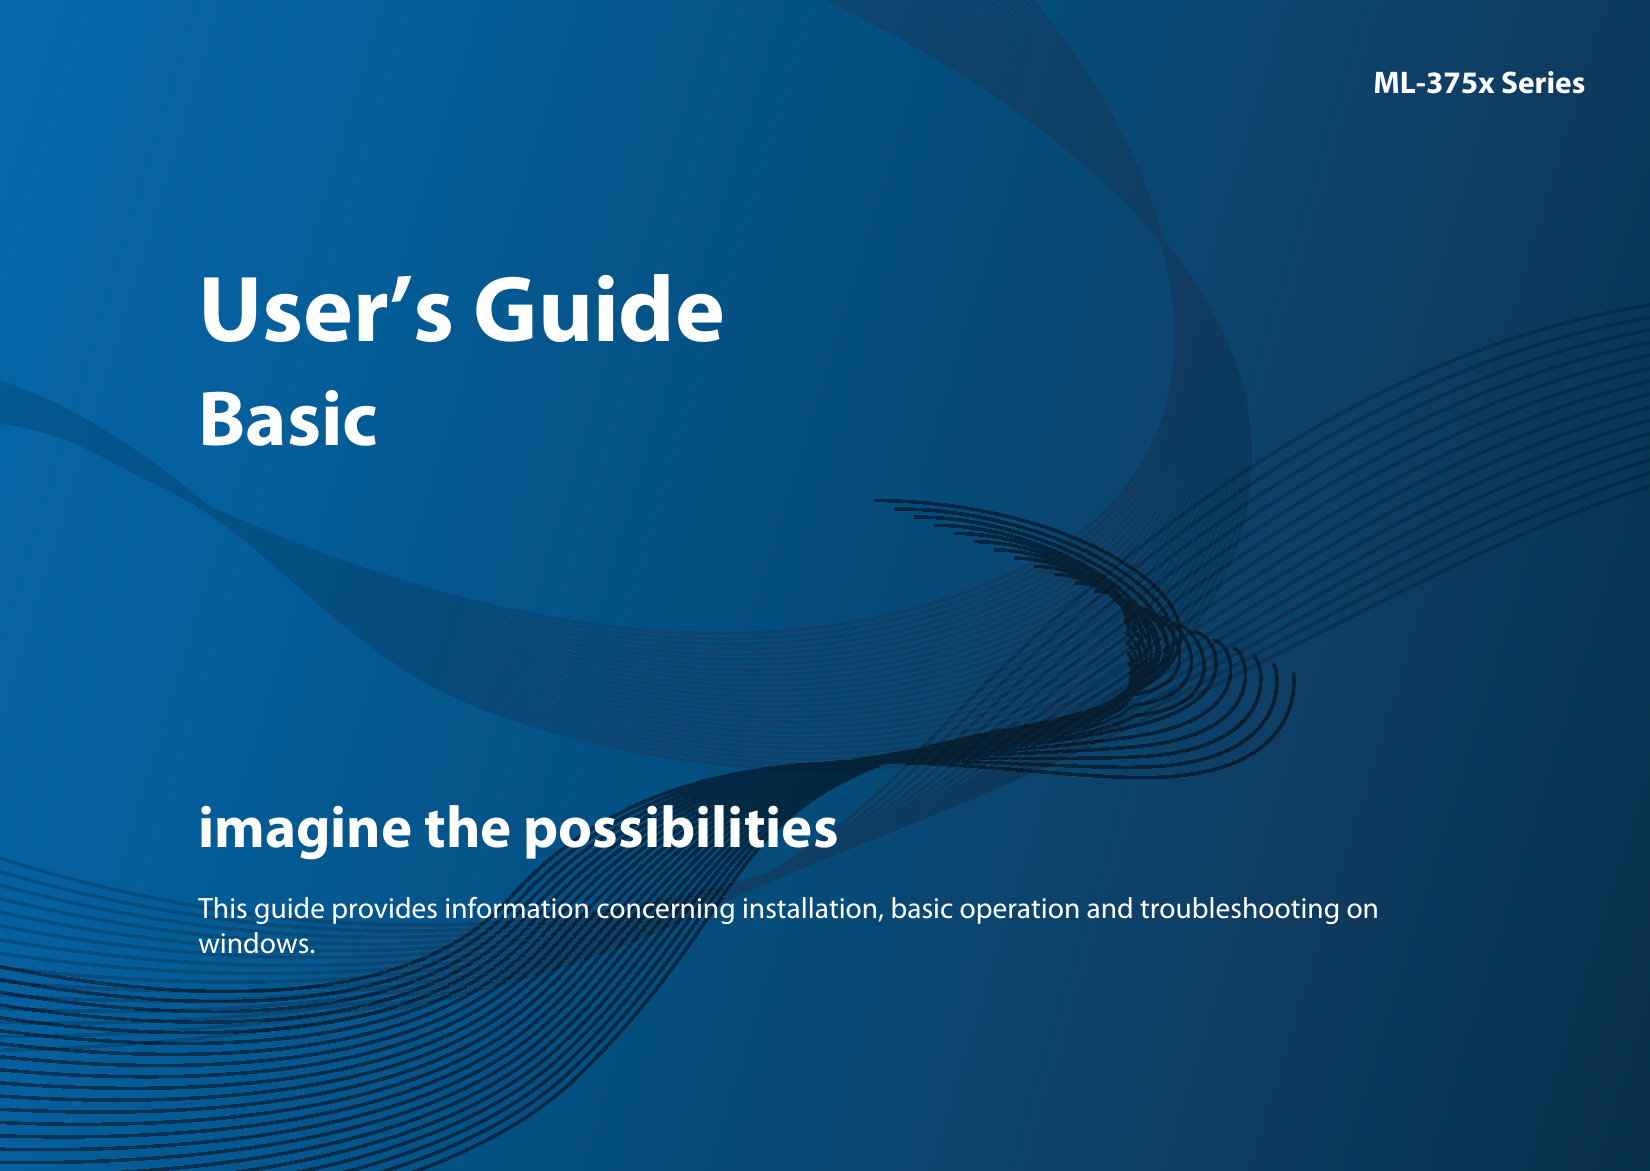 ML-375x SeriesUser’s GuideBasicimagine the possibilitiesThis guide provides information concerning installation, basic operation and troubleshooting on windows.